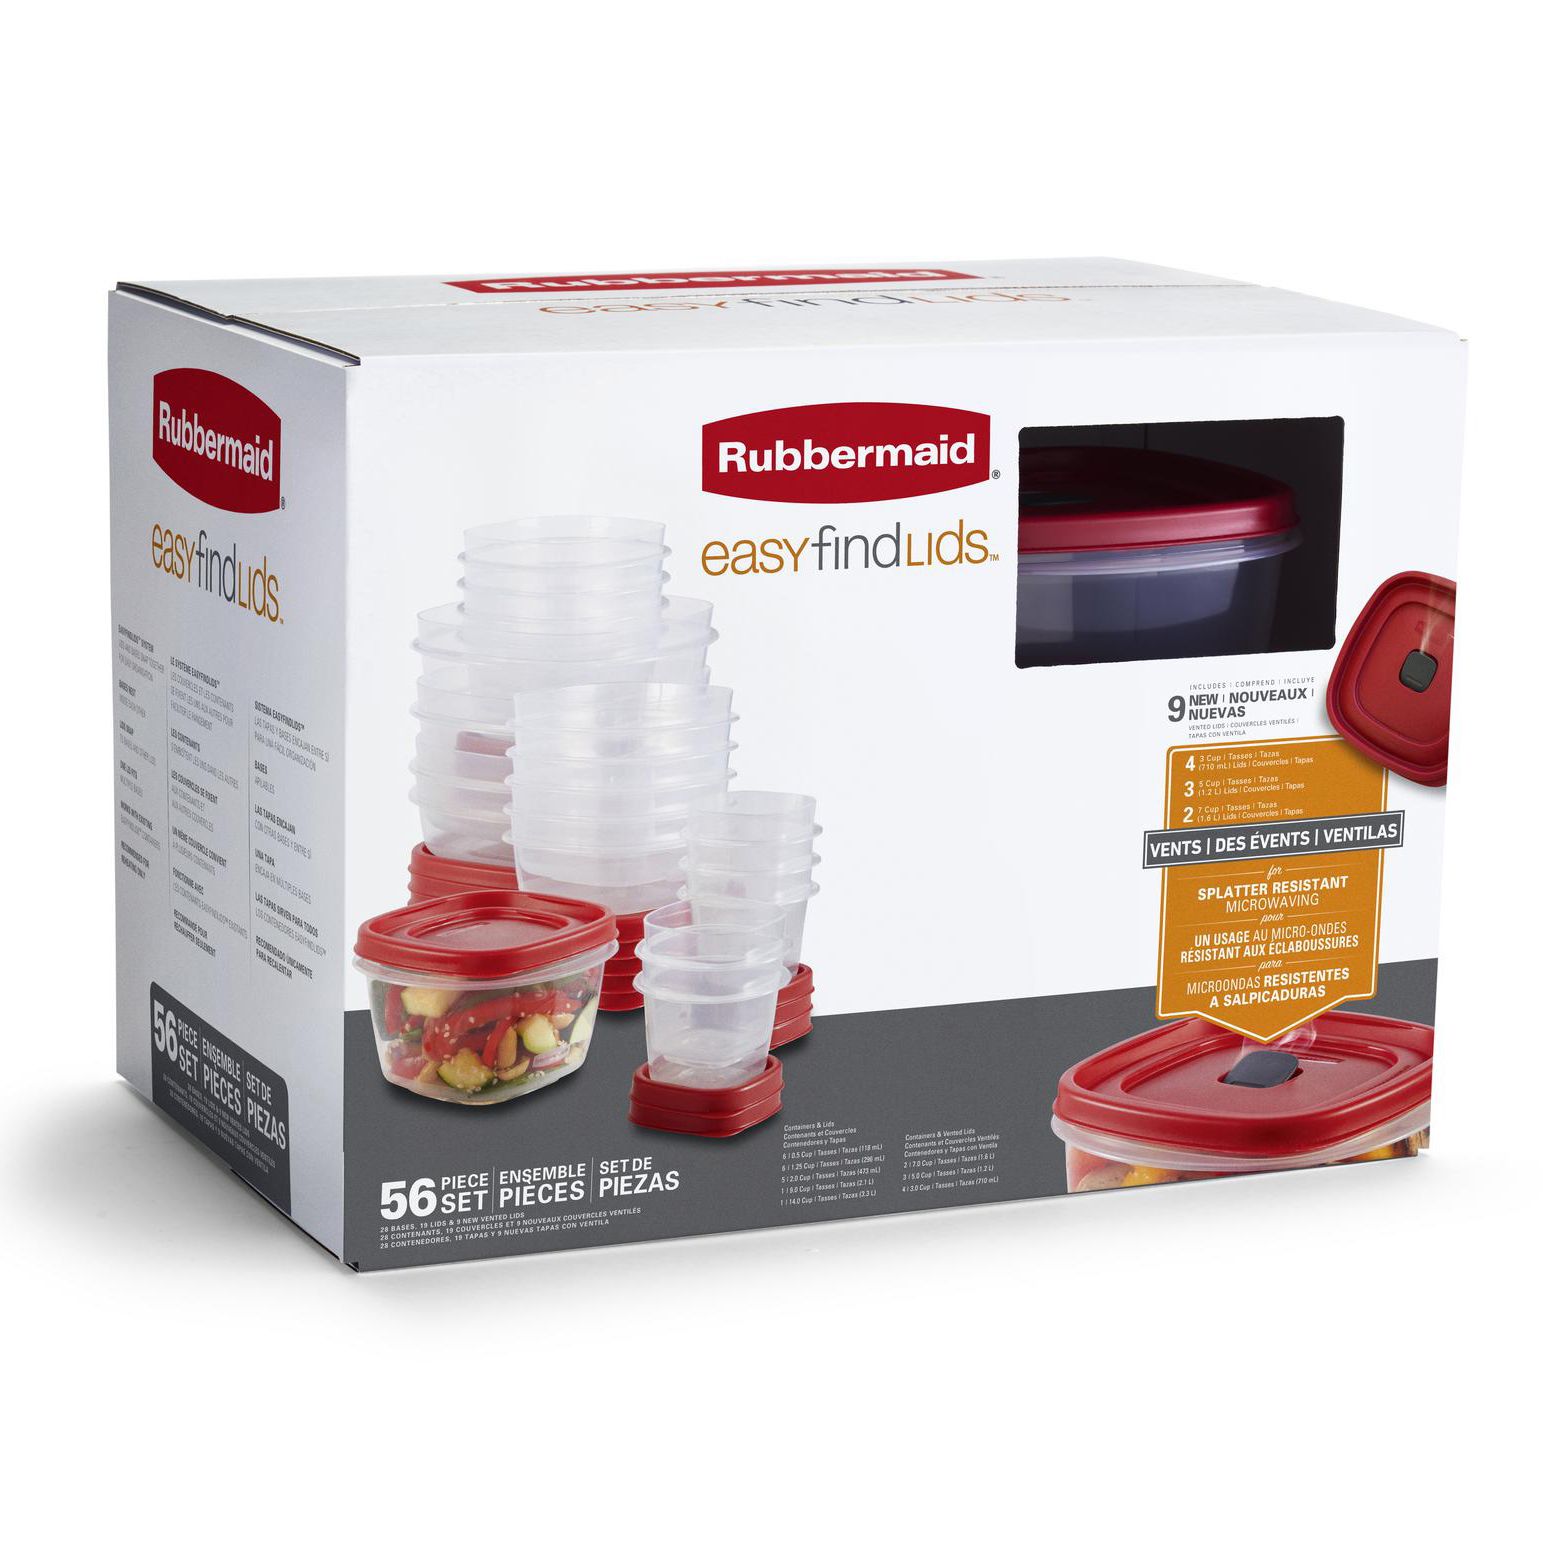 Rubbermaid Easy Find Lids 9-Cup Flex & Seal Food Storage Container (4-Pack)